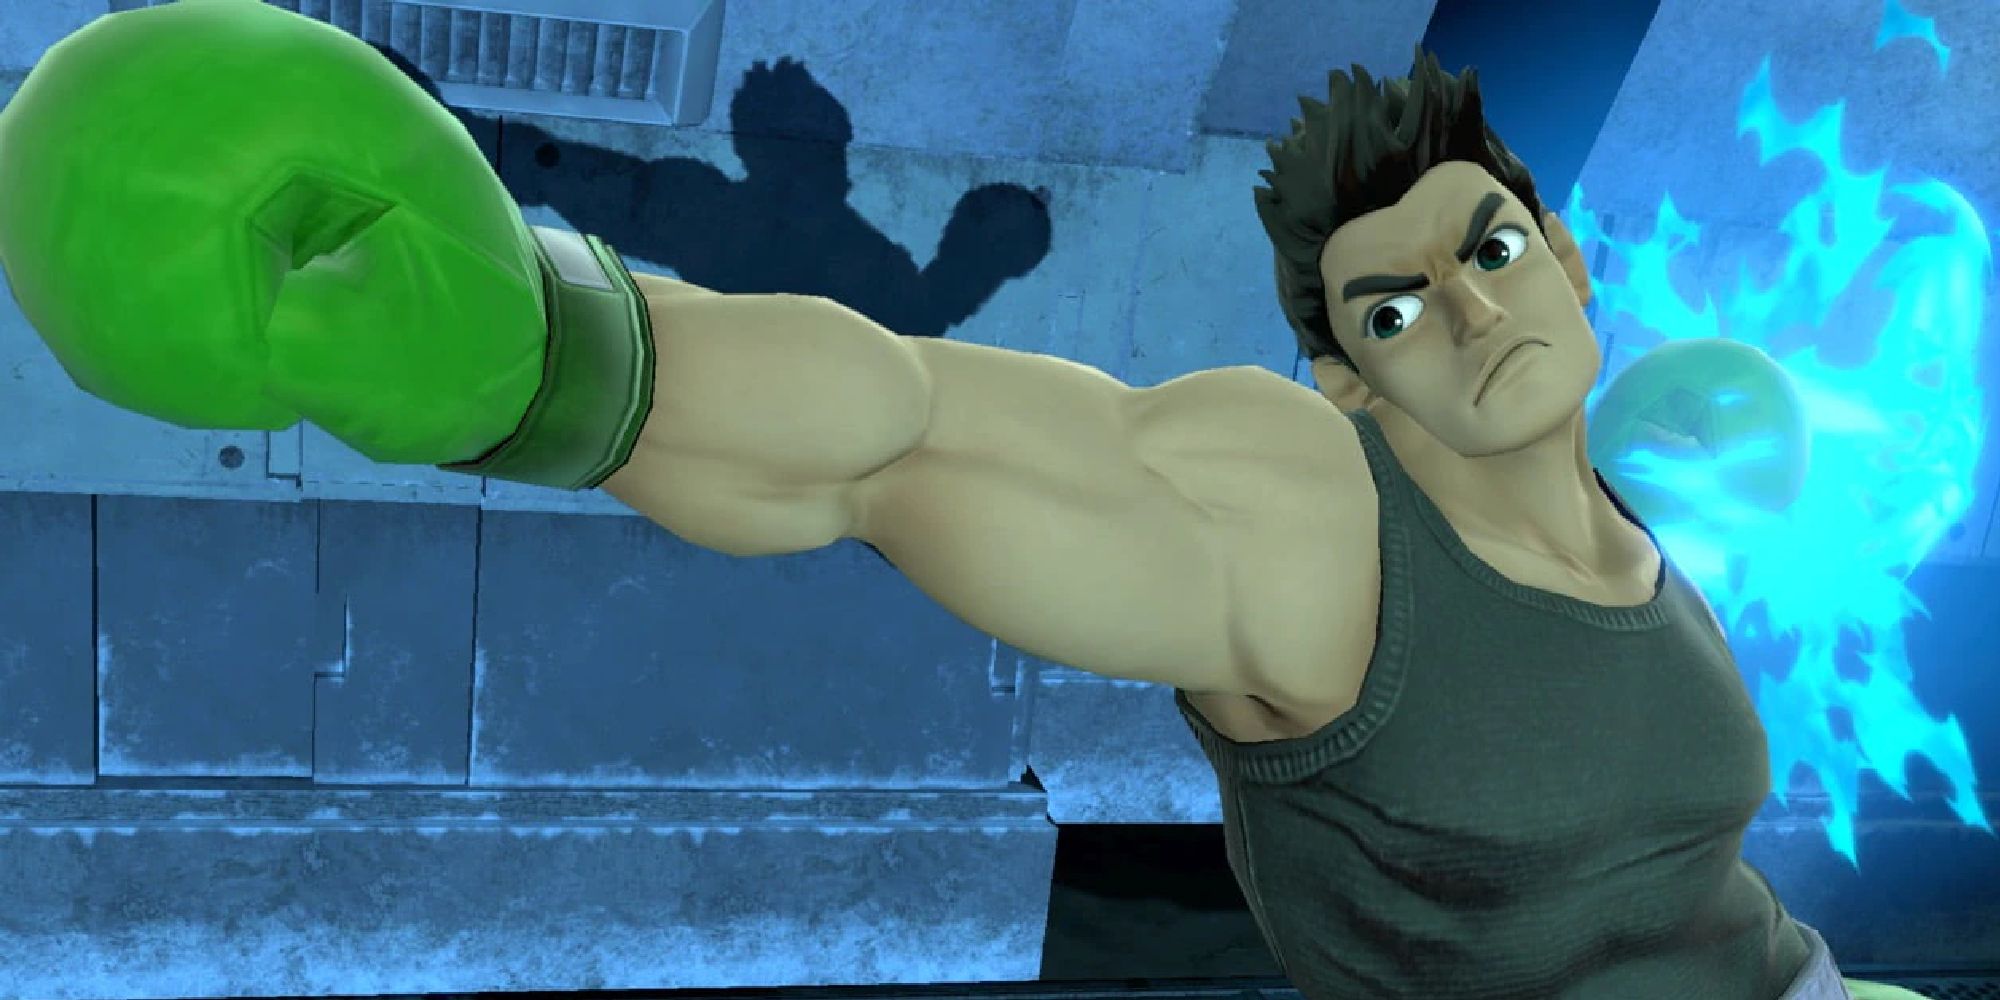 Little Mac charging up his neutral special